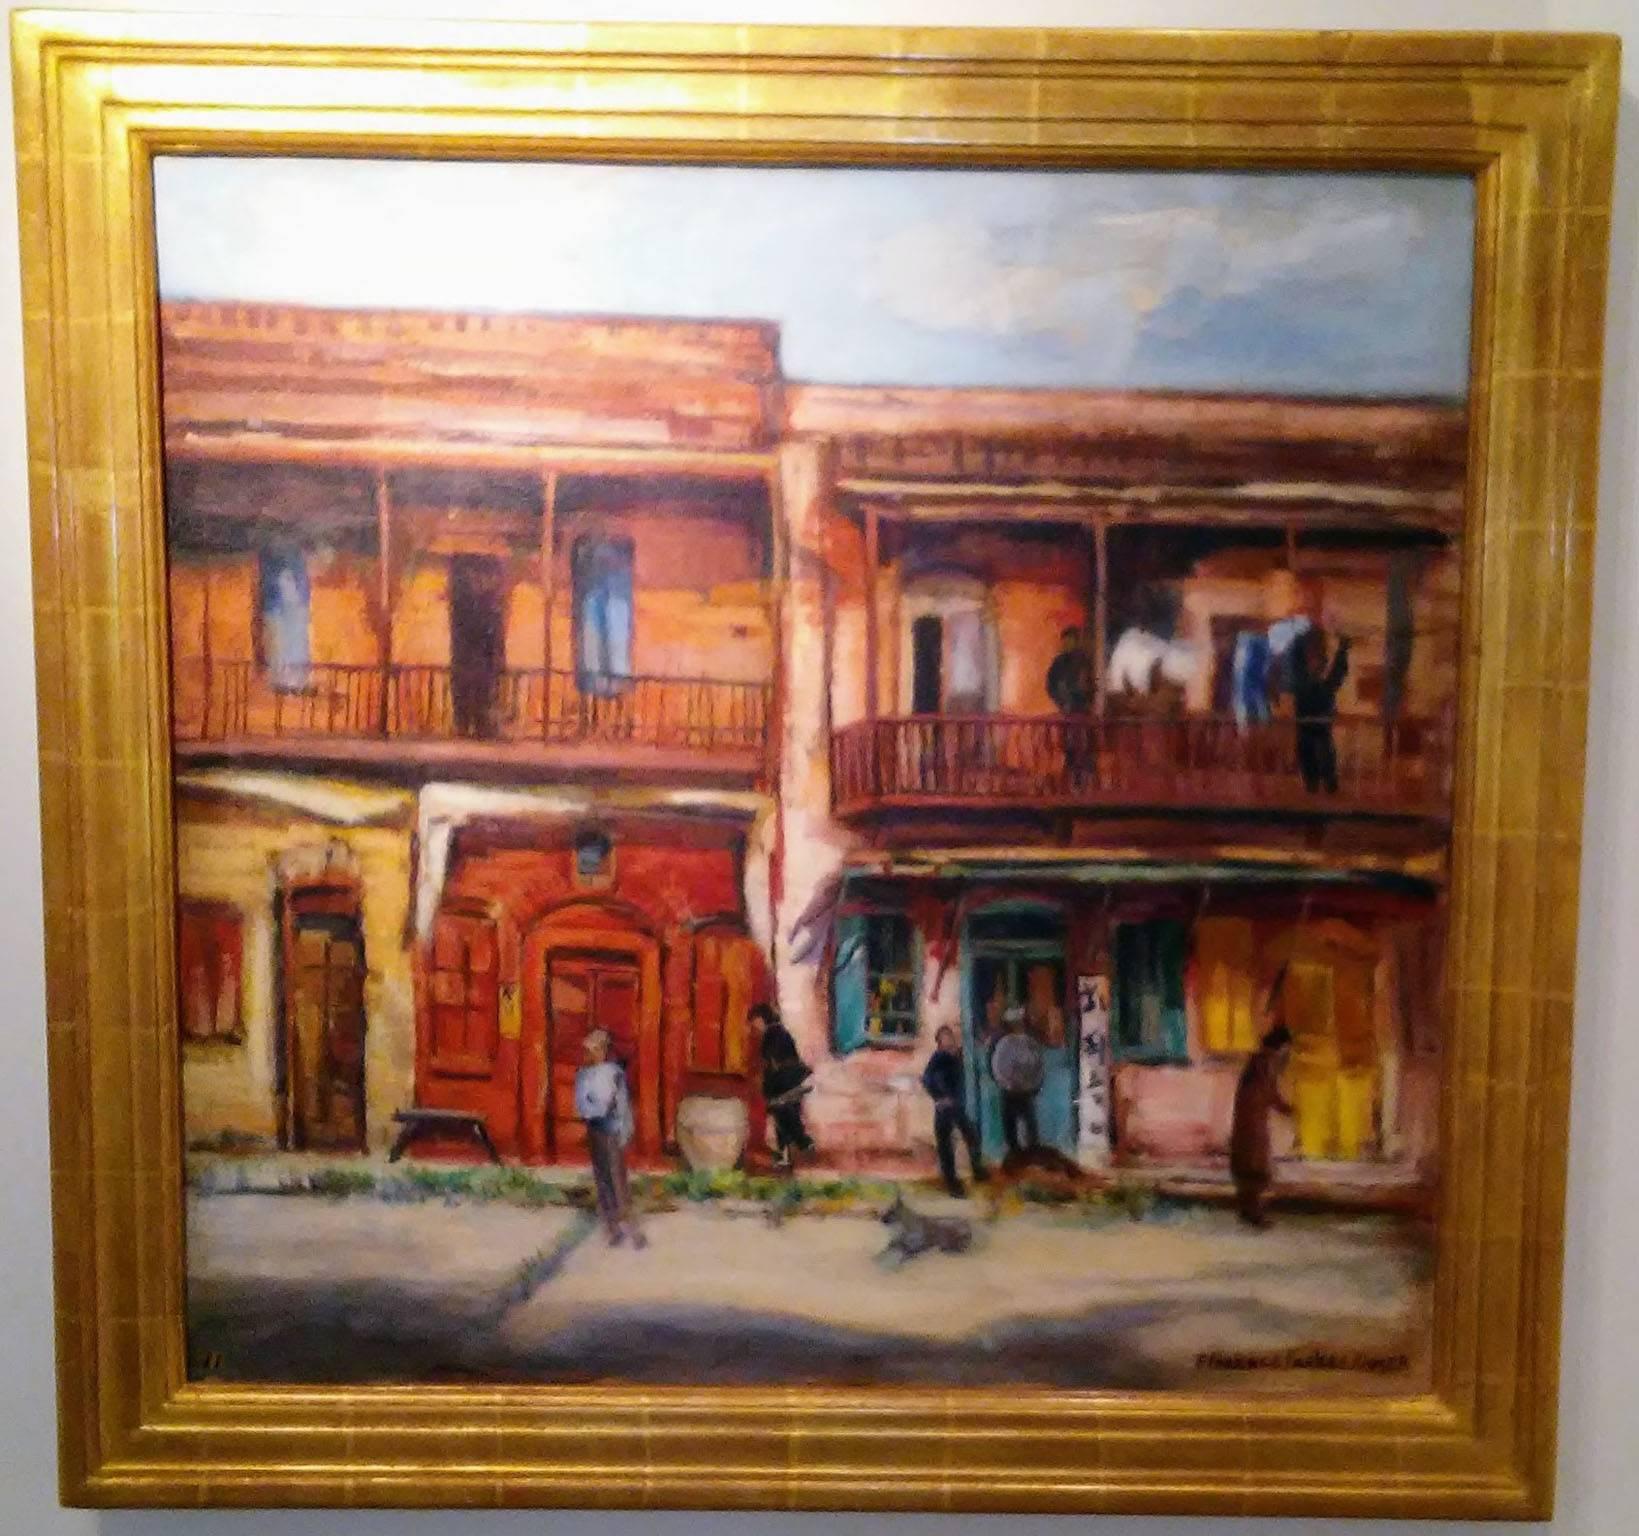 Chinatown, Los Angeles - Painting by Florence Parker Bloser